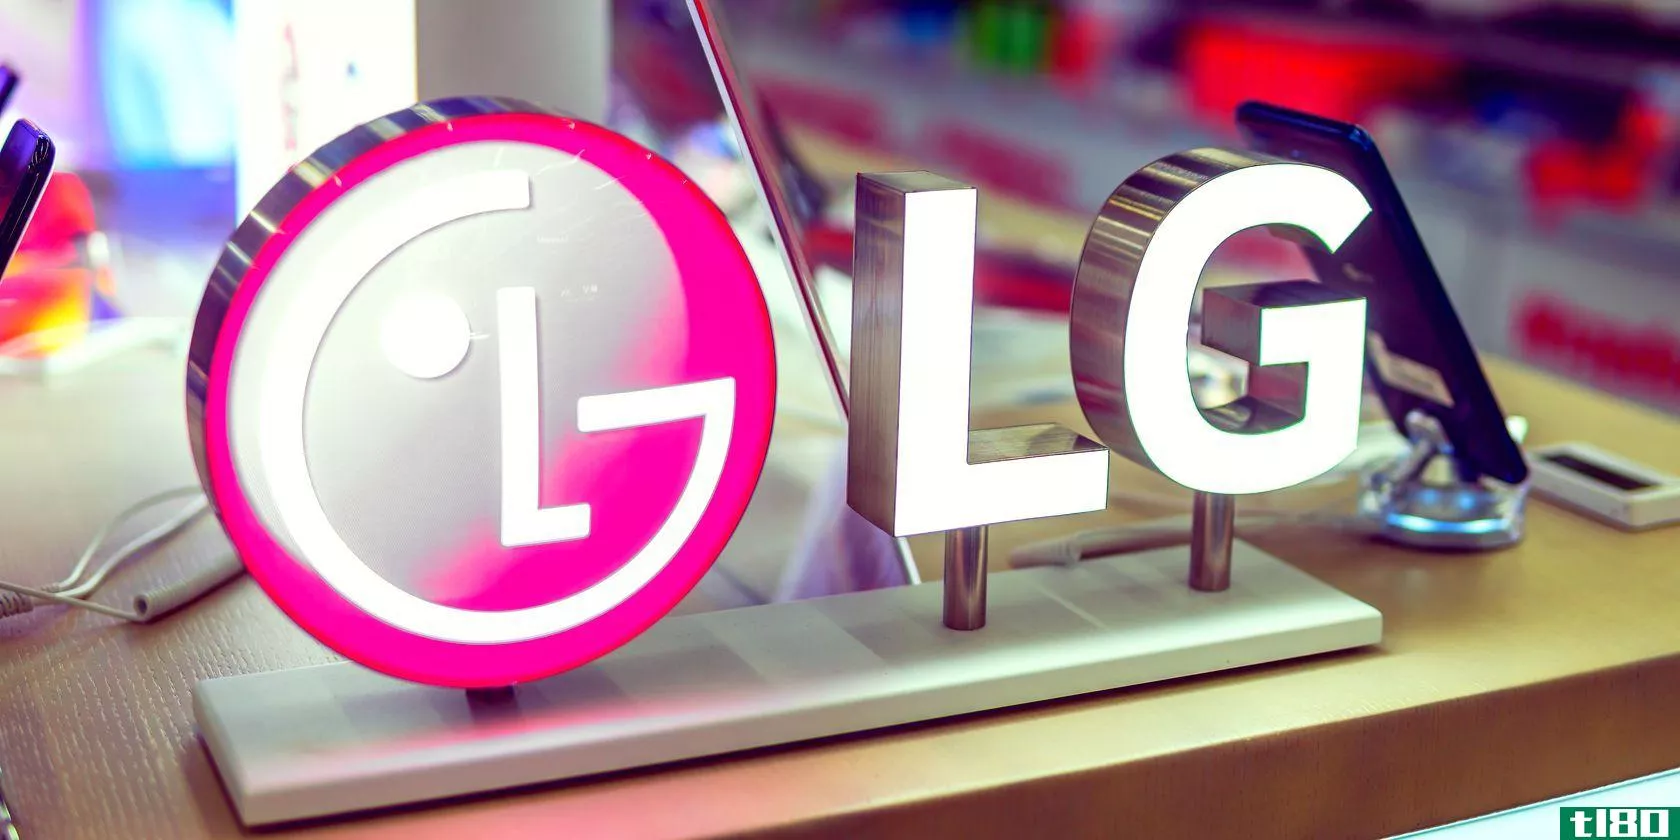 LG logo feature